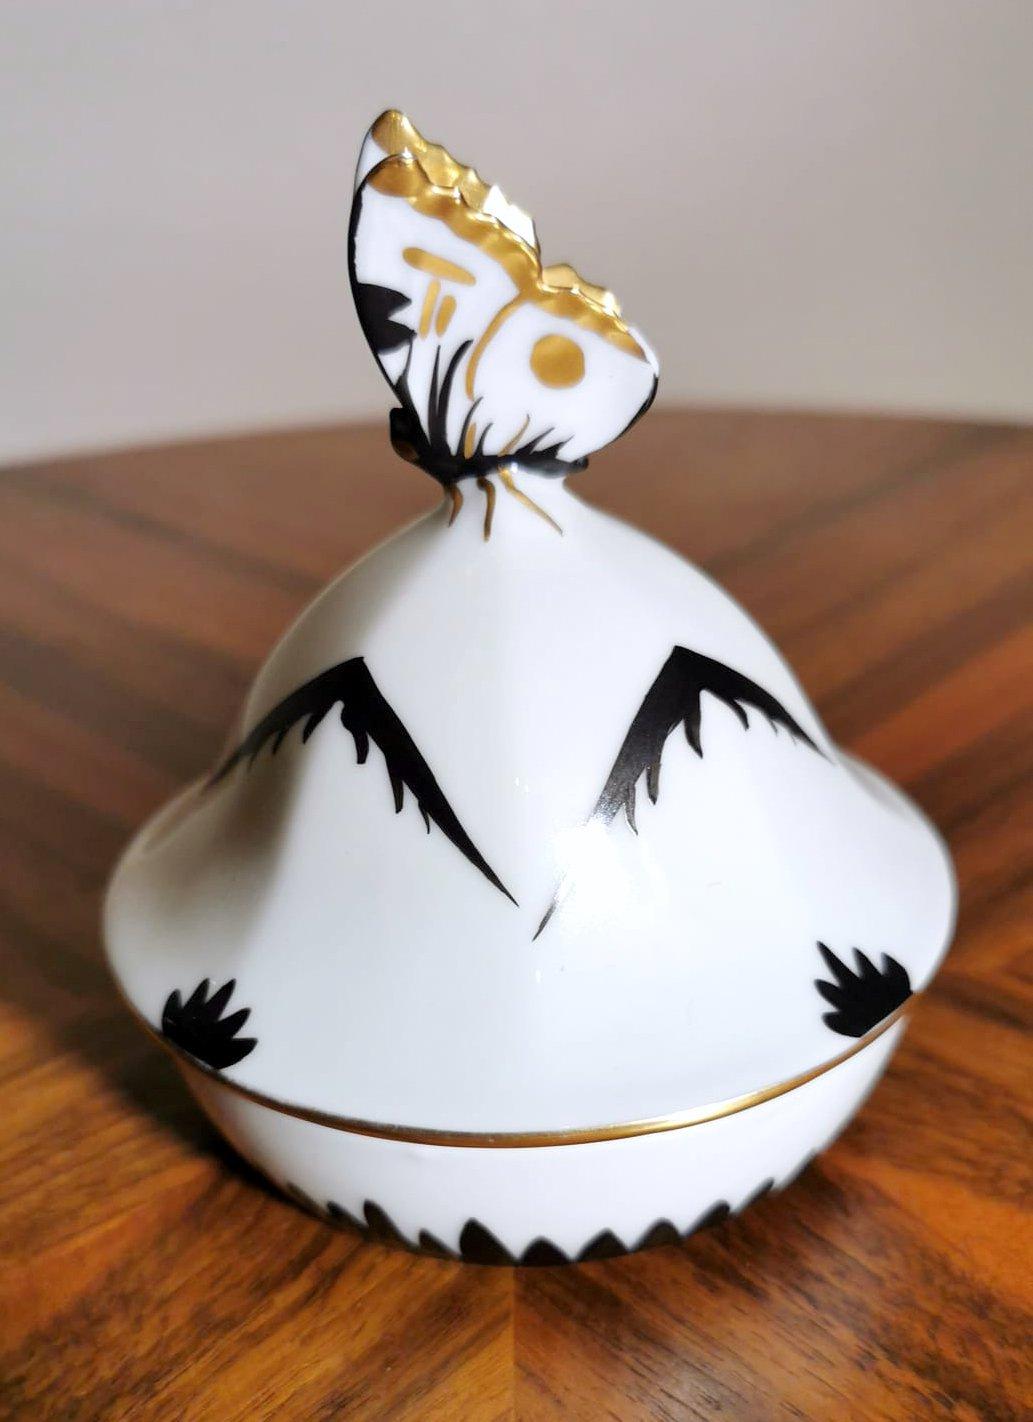 We kindly suggest you read the whole description, because with it we try to give you detailed technical and historical information to guarantee the authenticity of our objects.
Graceful and delicate small round box in German porcelain in white with